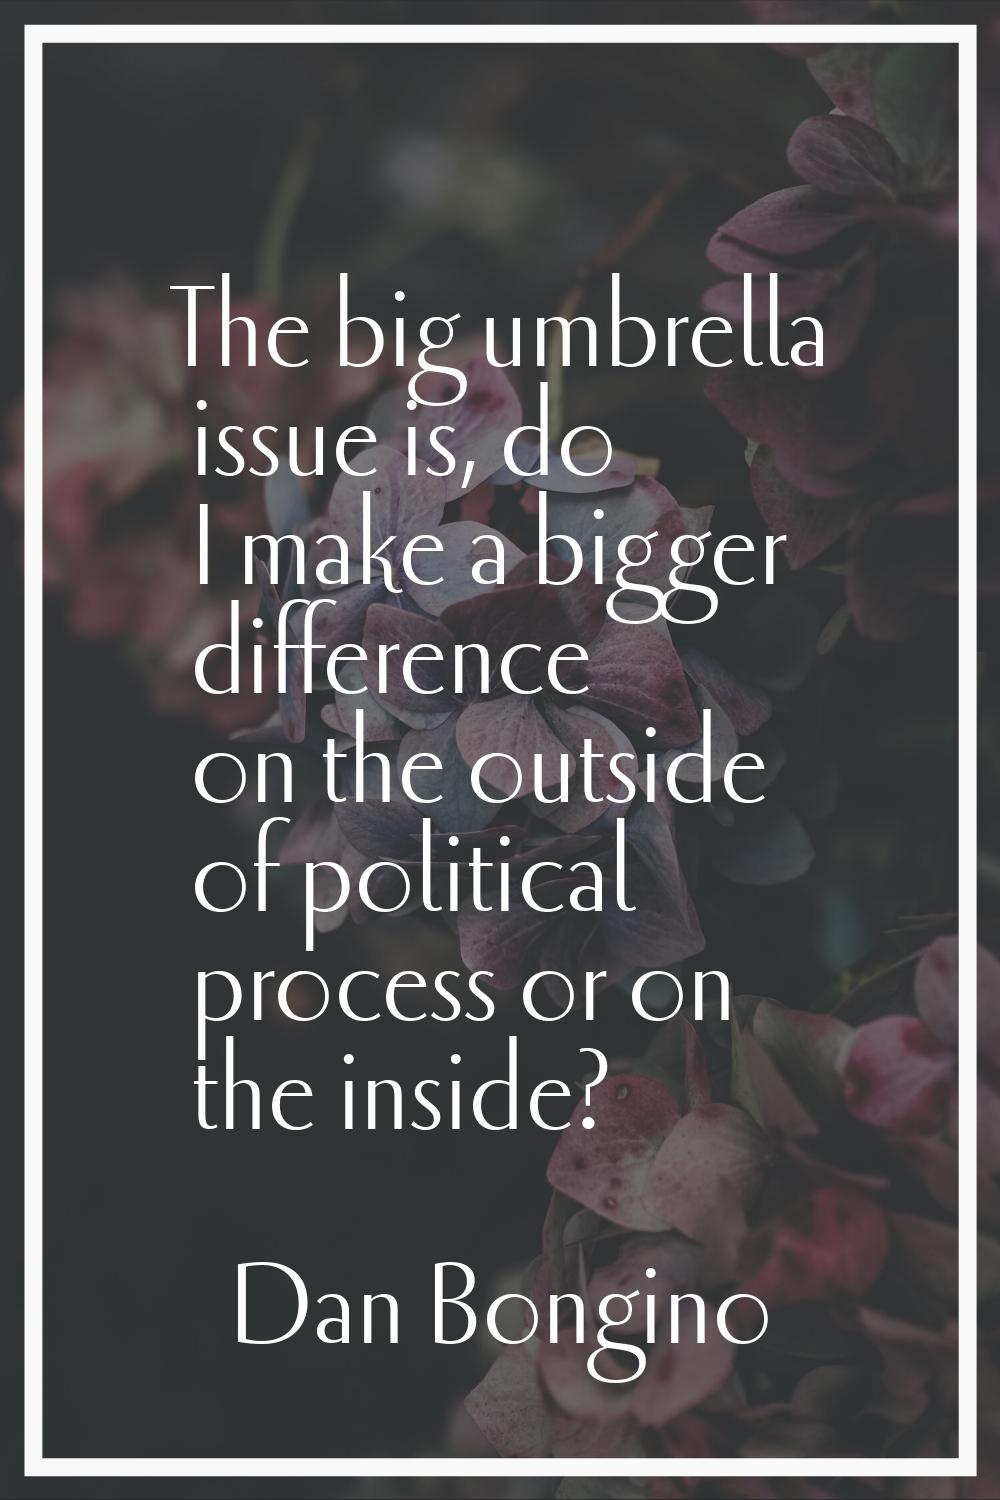 The big umbrella issue is, do I make a bigger difference on the outside of political process or on 